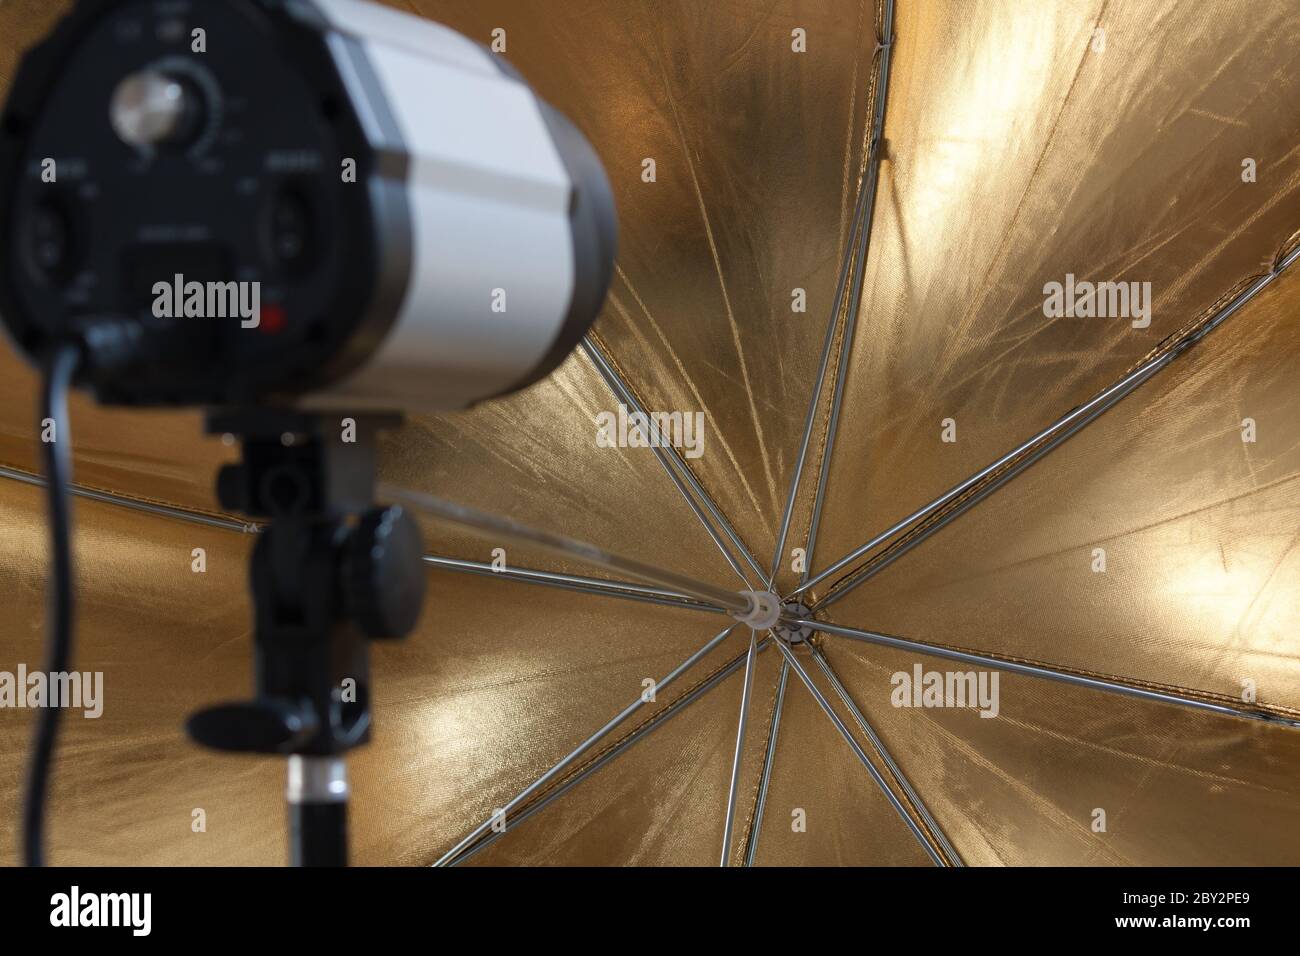 Studio flash in front of a gold reflective umbrell Stock Photo